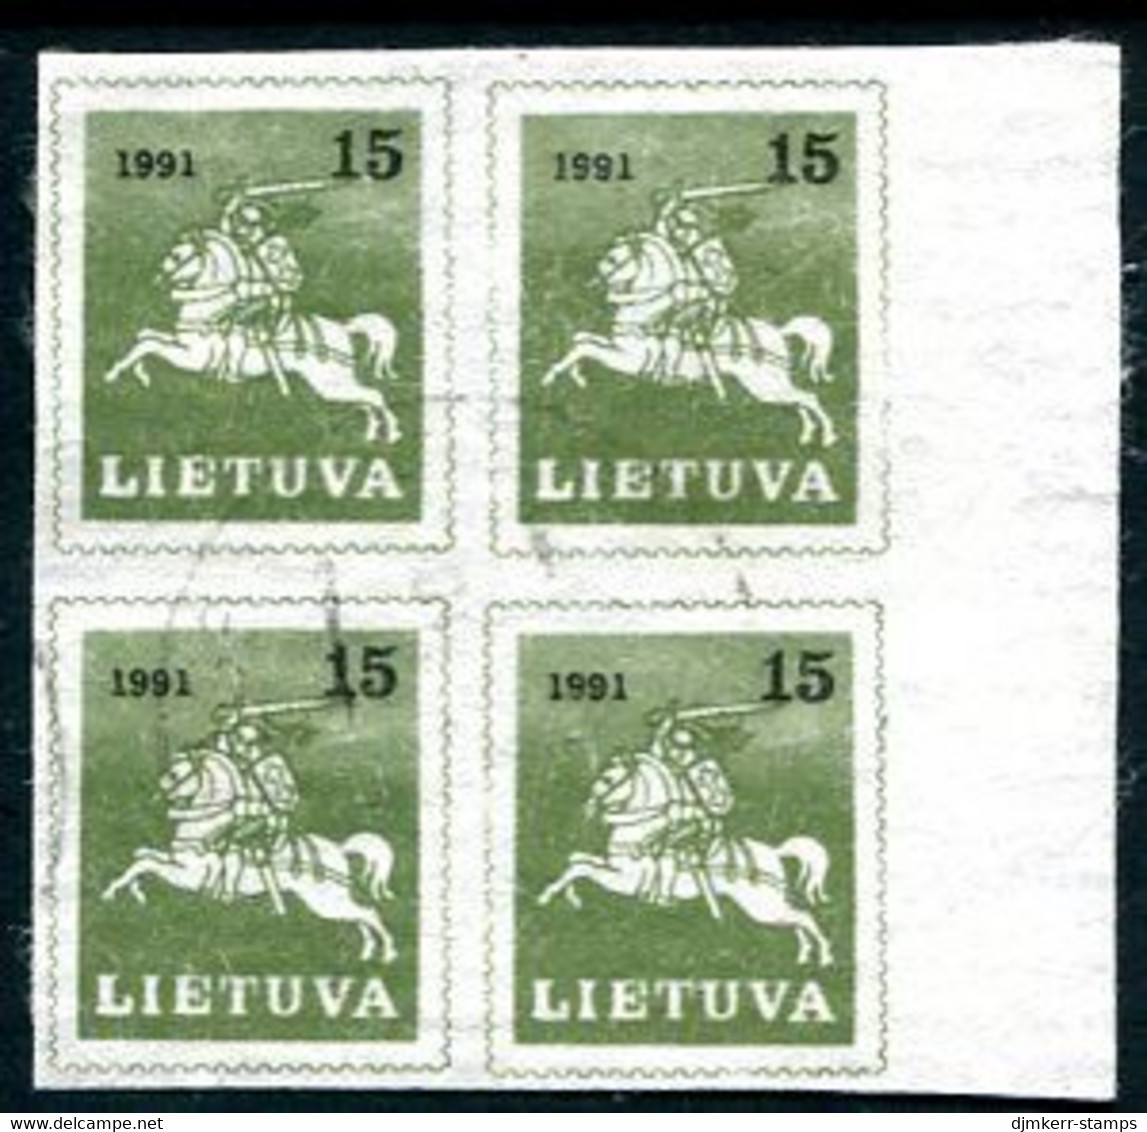 LITHUANIA 1991  Lithuanian Knight Definitive Imperforate Block Of 4 Used.  Michel 472 - Lituanie